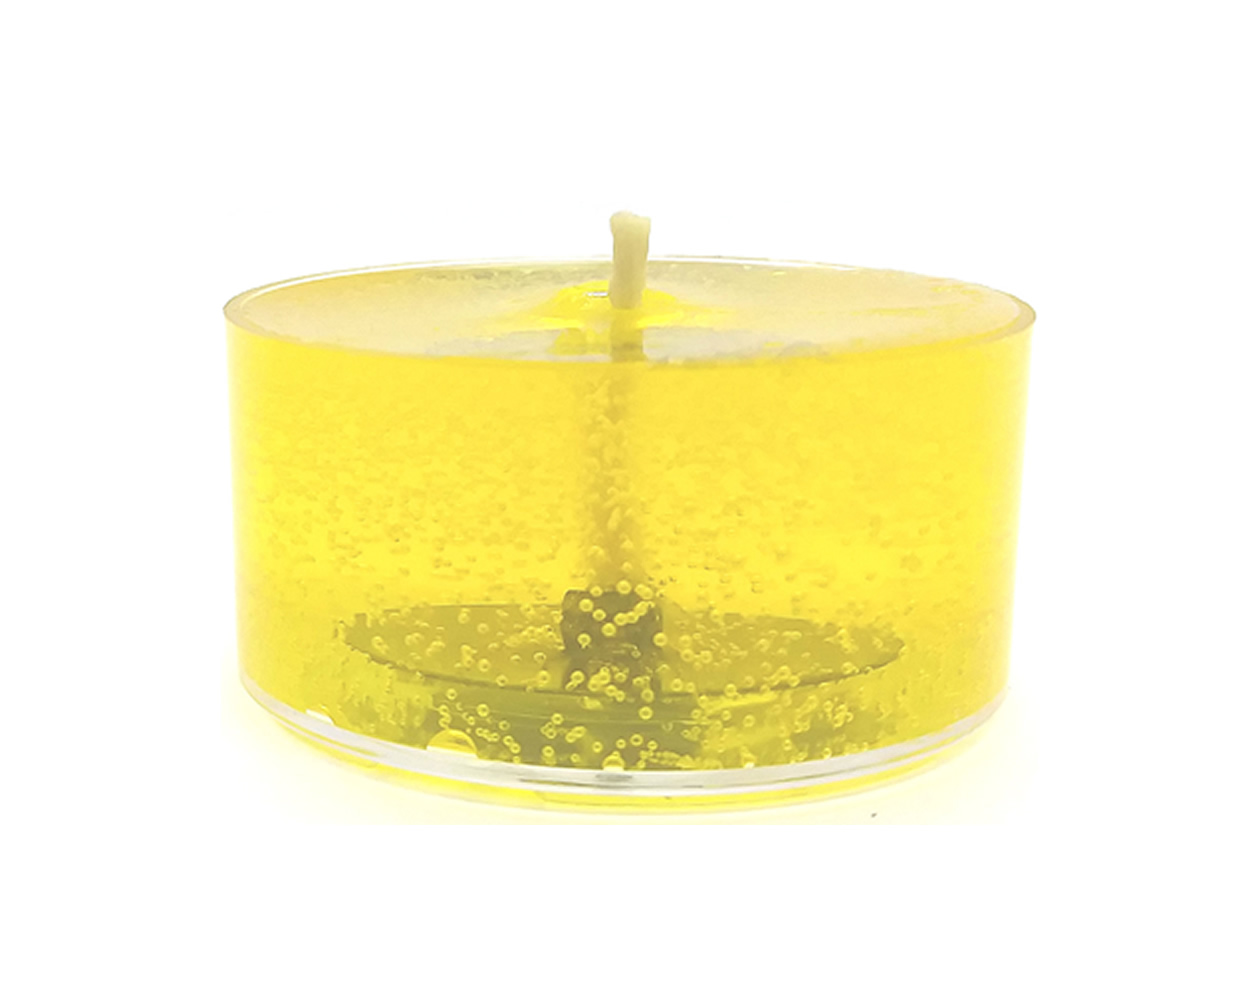 Seashore Scented Gel Candle Tea Lights - 24 pk. [1283] : The Gel Candle Co,  Scented Gel Candles for Sale Retail and Wholesale